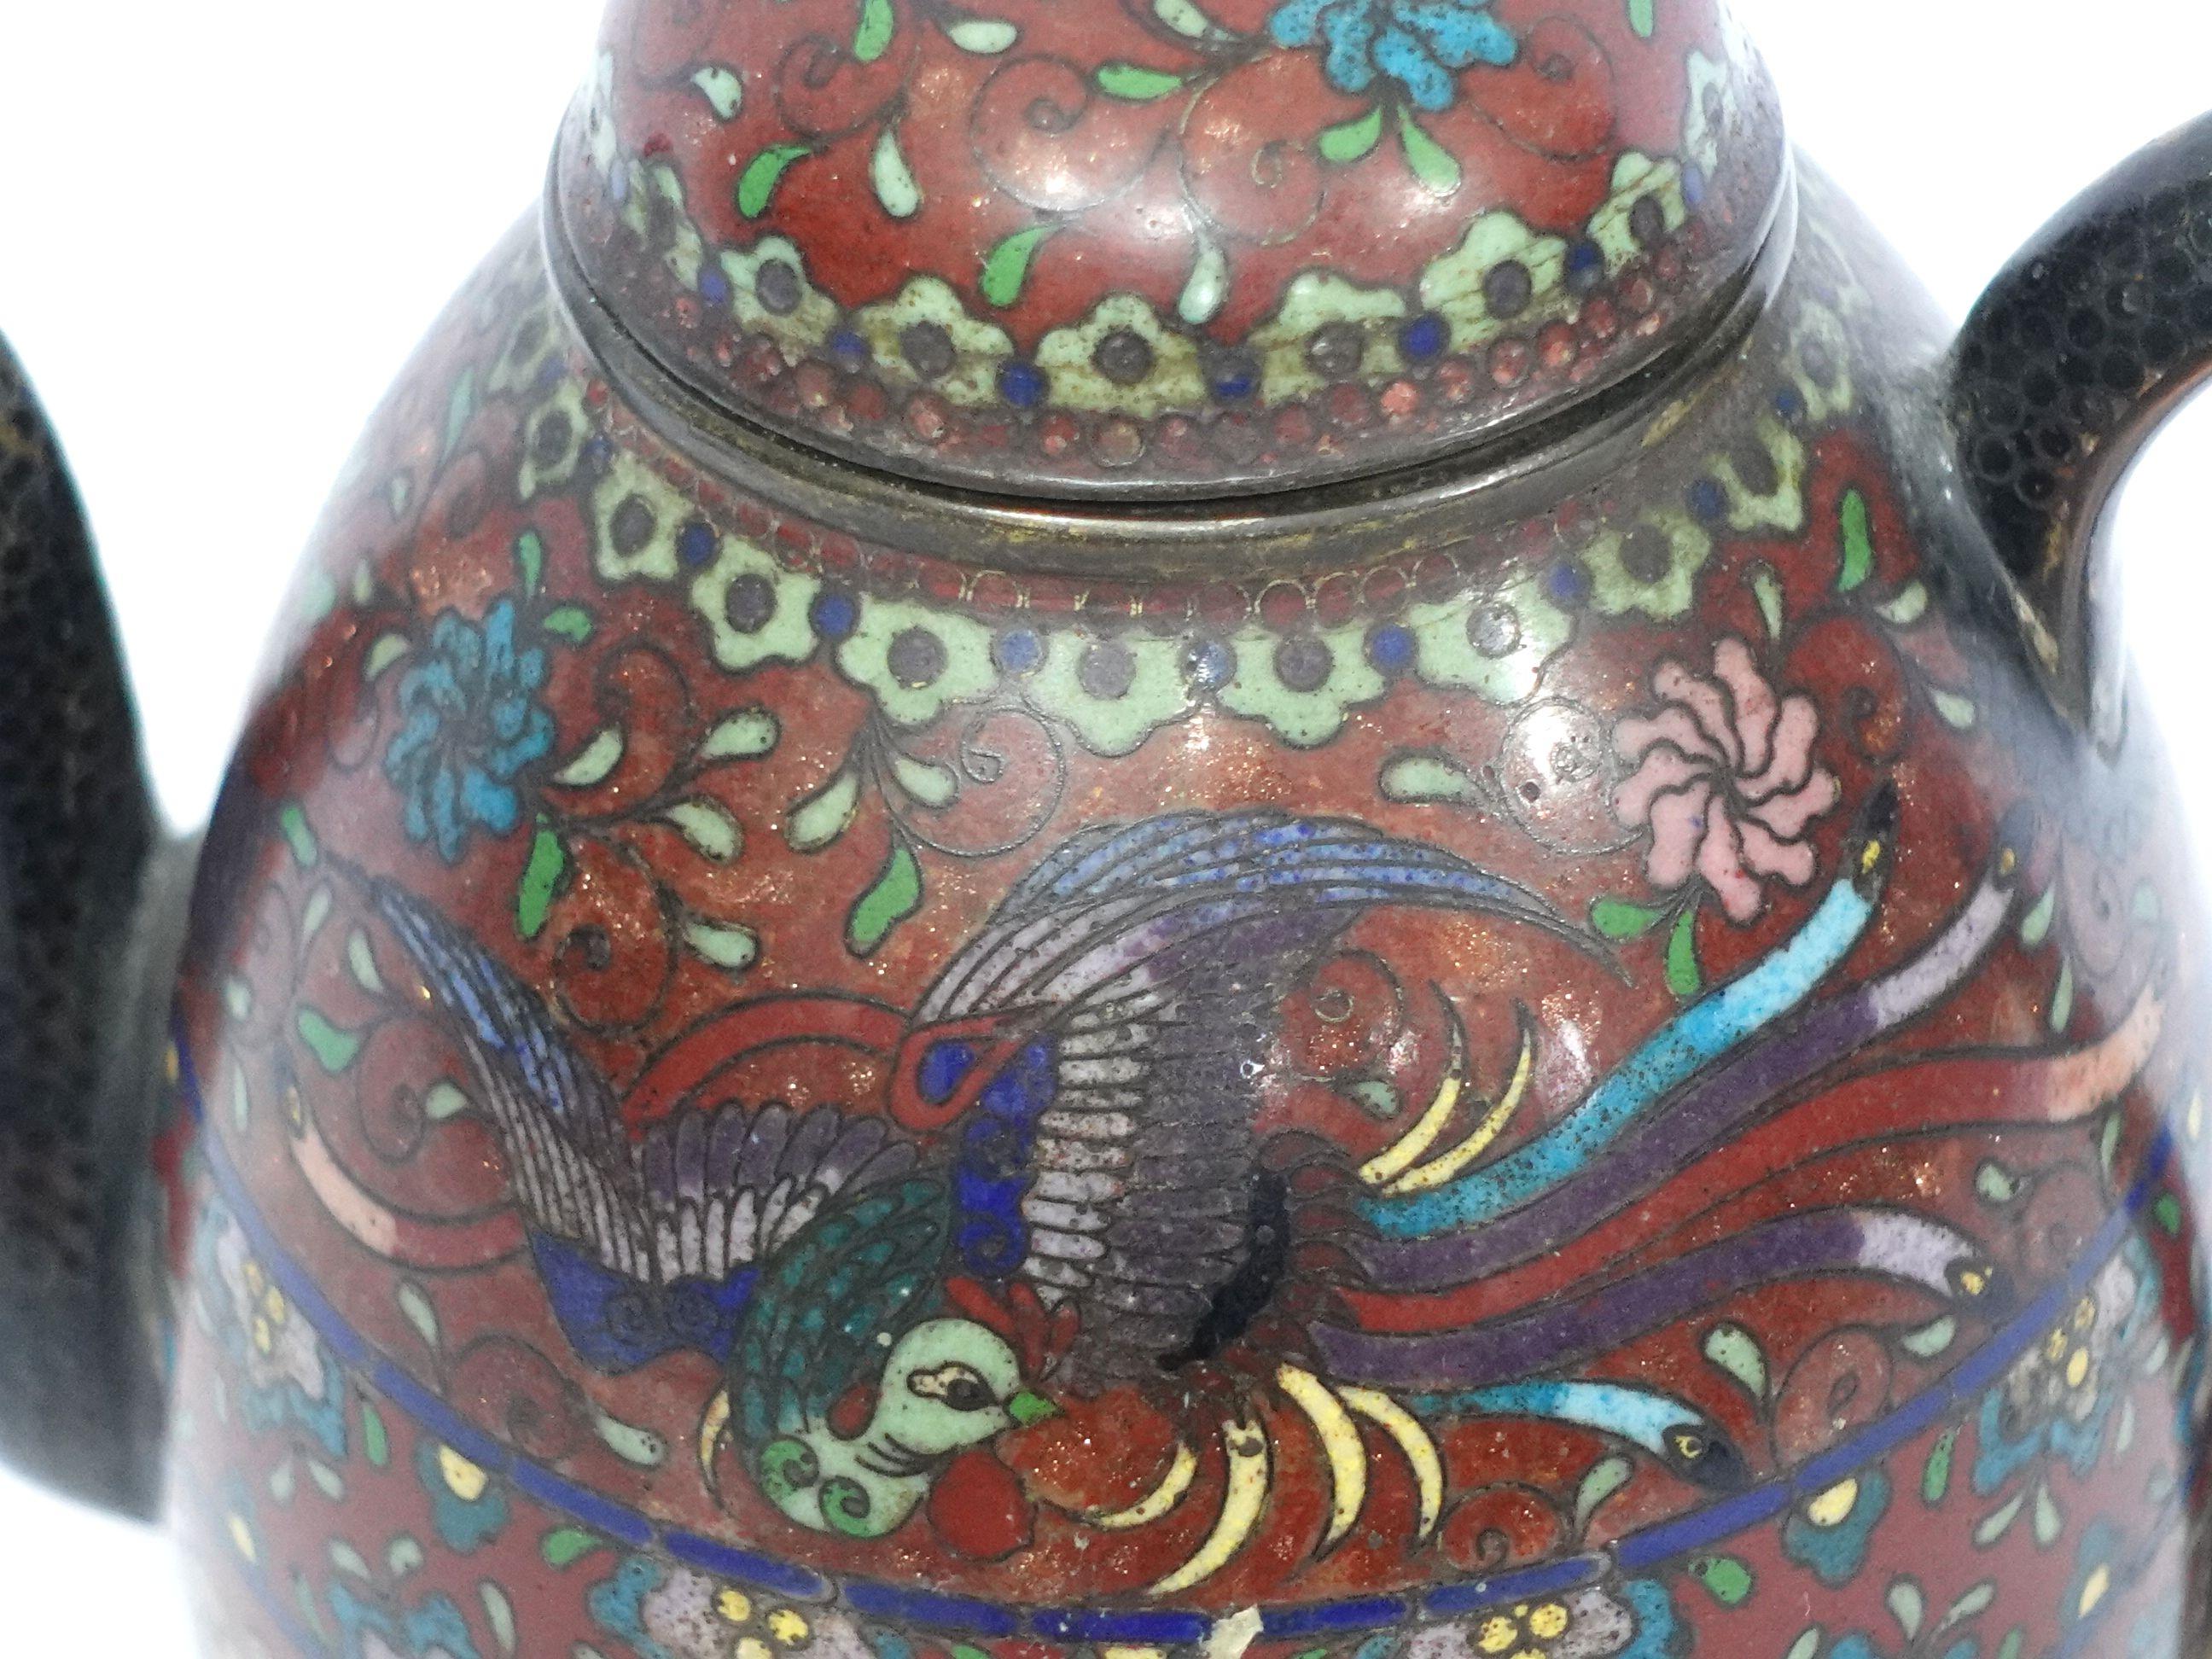 Quality work, amazing workmanship with absolutely fine details bronze cloisonné enameled teapot depicting the scene of a flying bird and lots of details of floral and patterns with vivid colors of yellow, light golden green, red, blue, brown, and